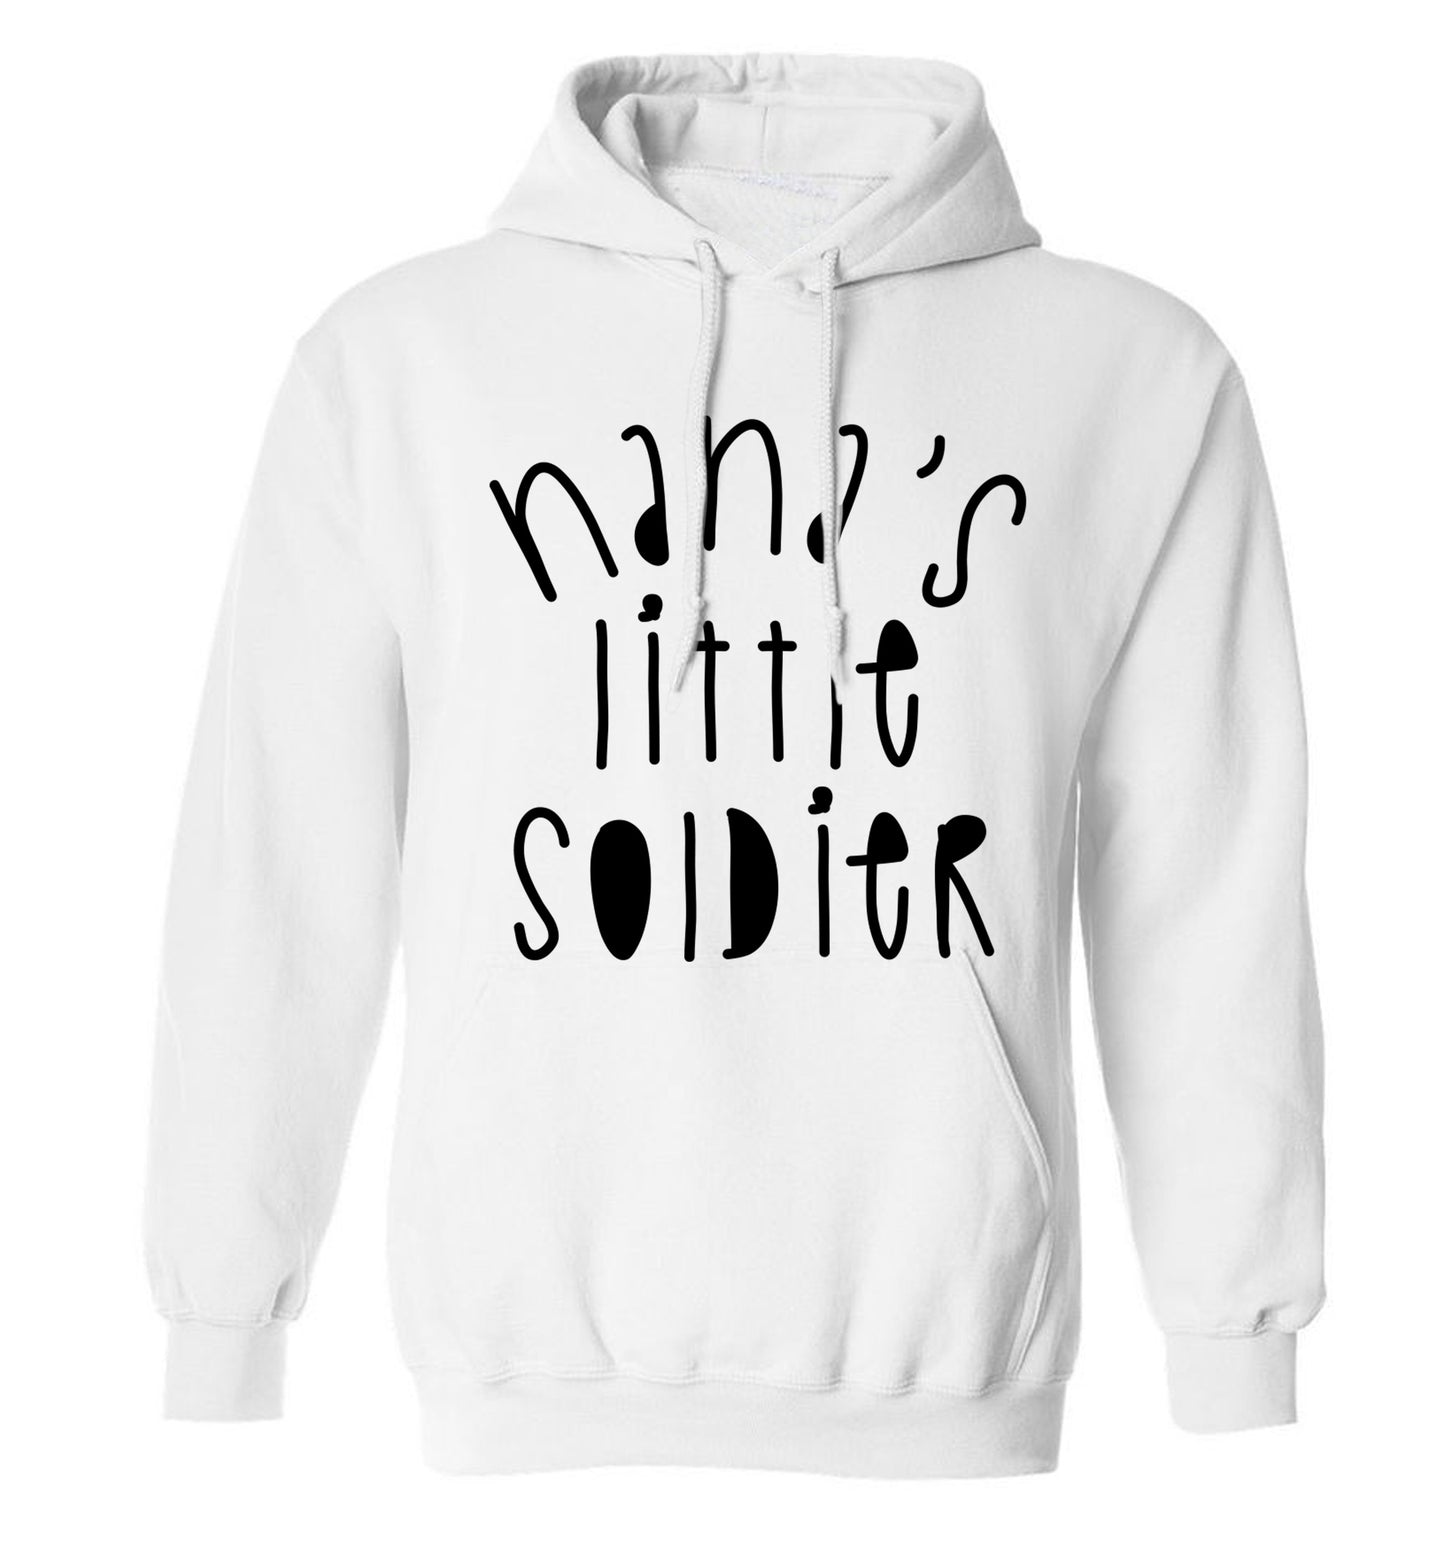 Nana's little soldier adults unisex white hoodie 2XL